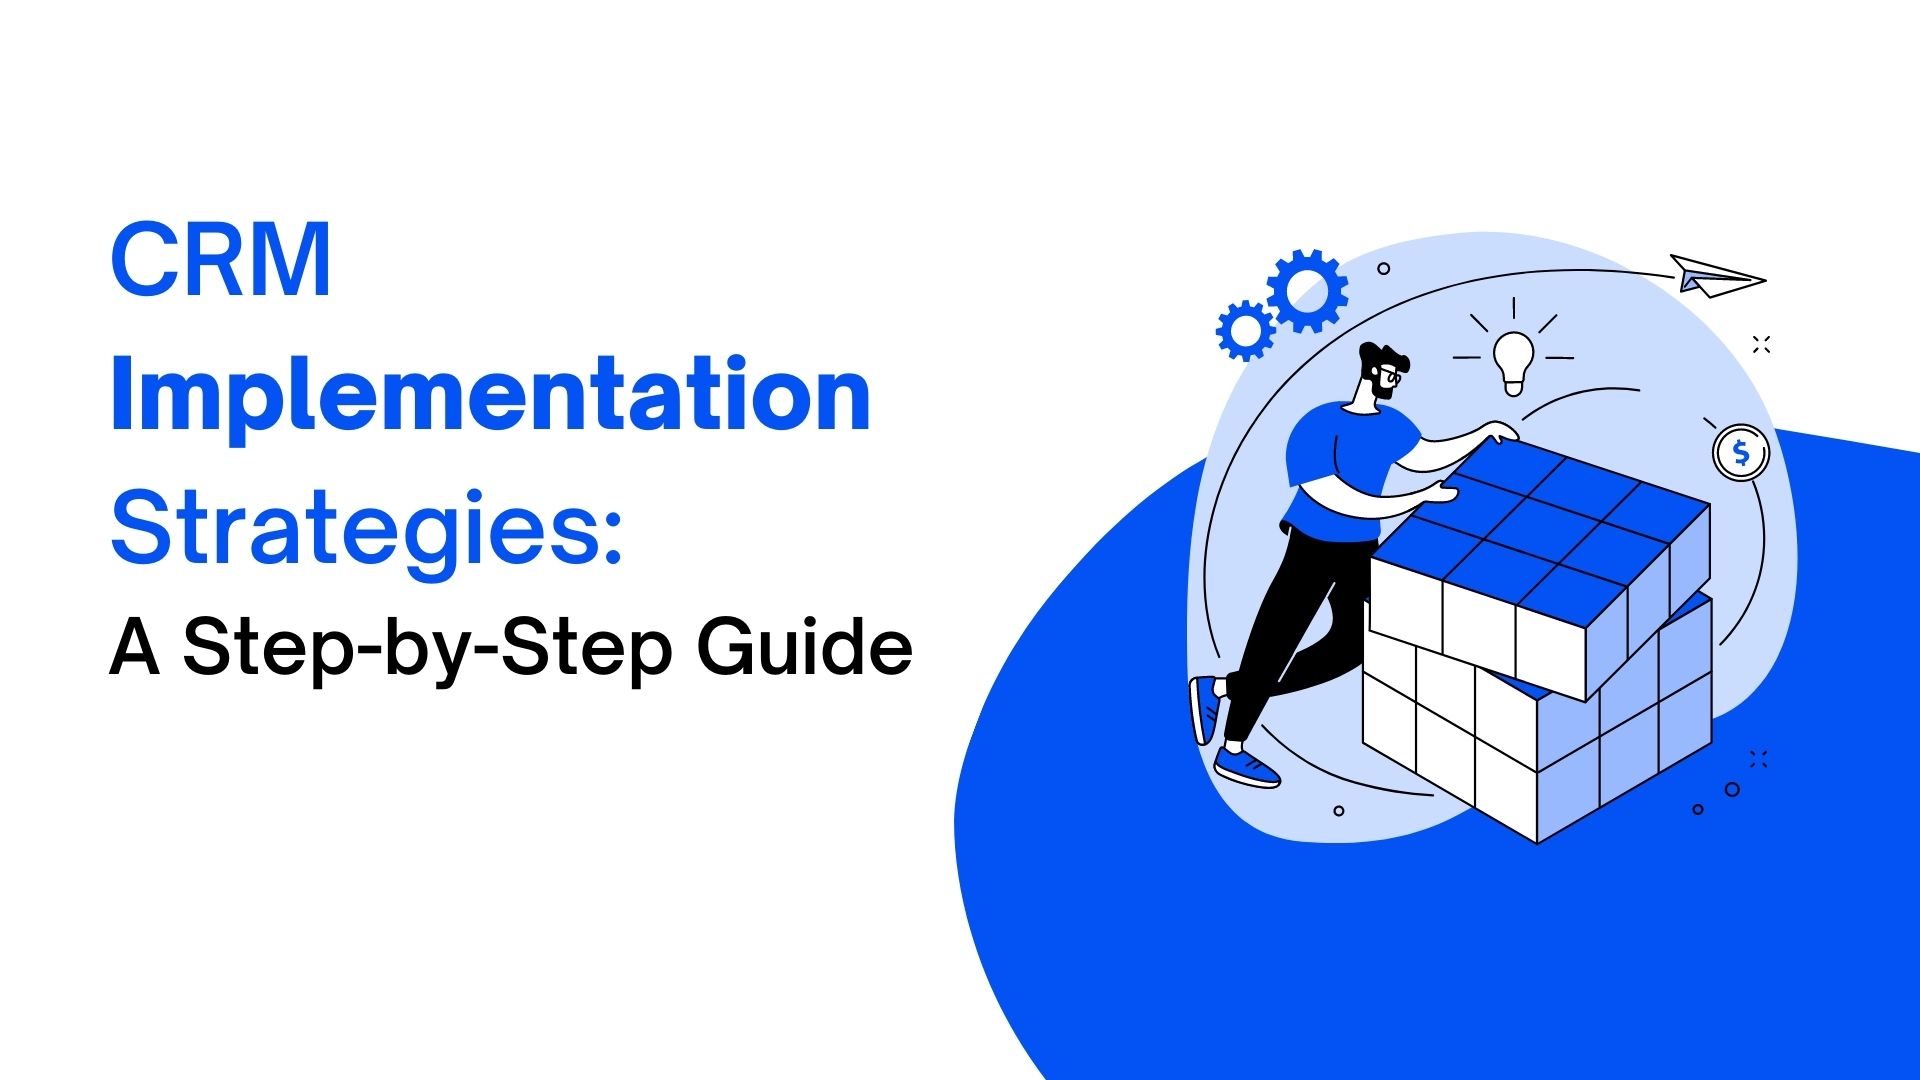 CRM Implementation Strategies: A Step-by-Step Guide